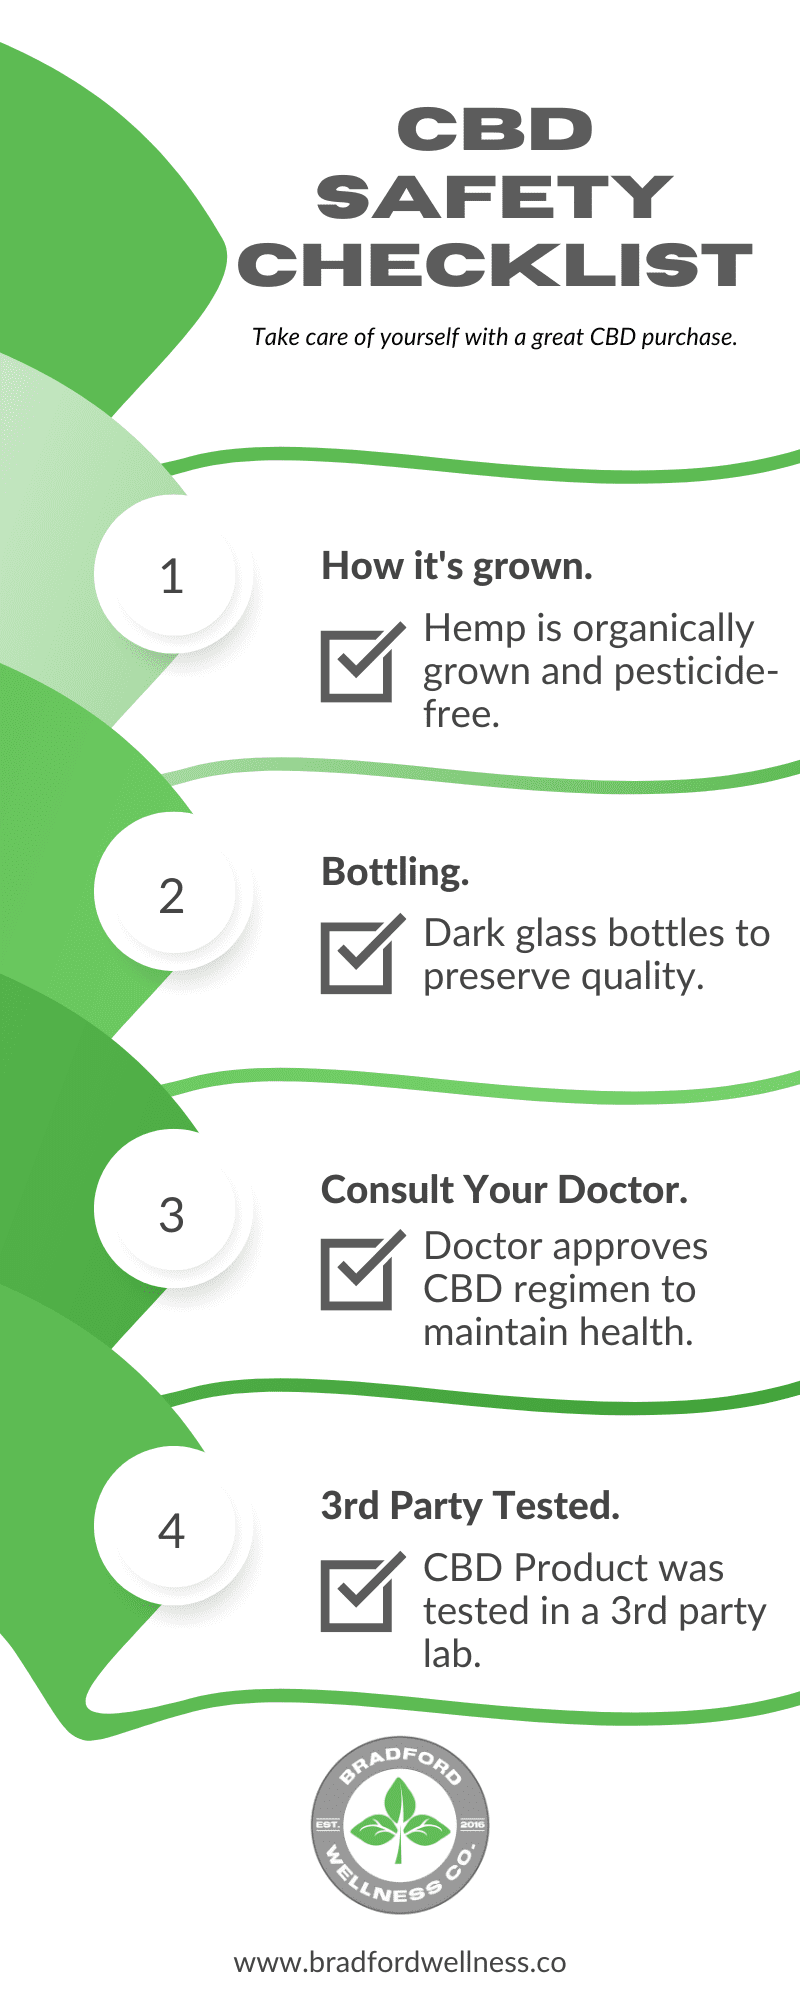 CBD Safety Checklist by Bradford Wellness Co. Areas to check off the list include: how the CBD is grown, how the CBD is bottled, consulting with your doctor, and if the CBD has been 3rd party tested with CoA's.